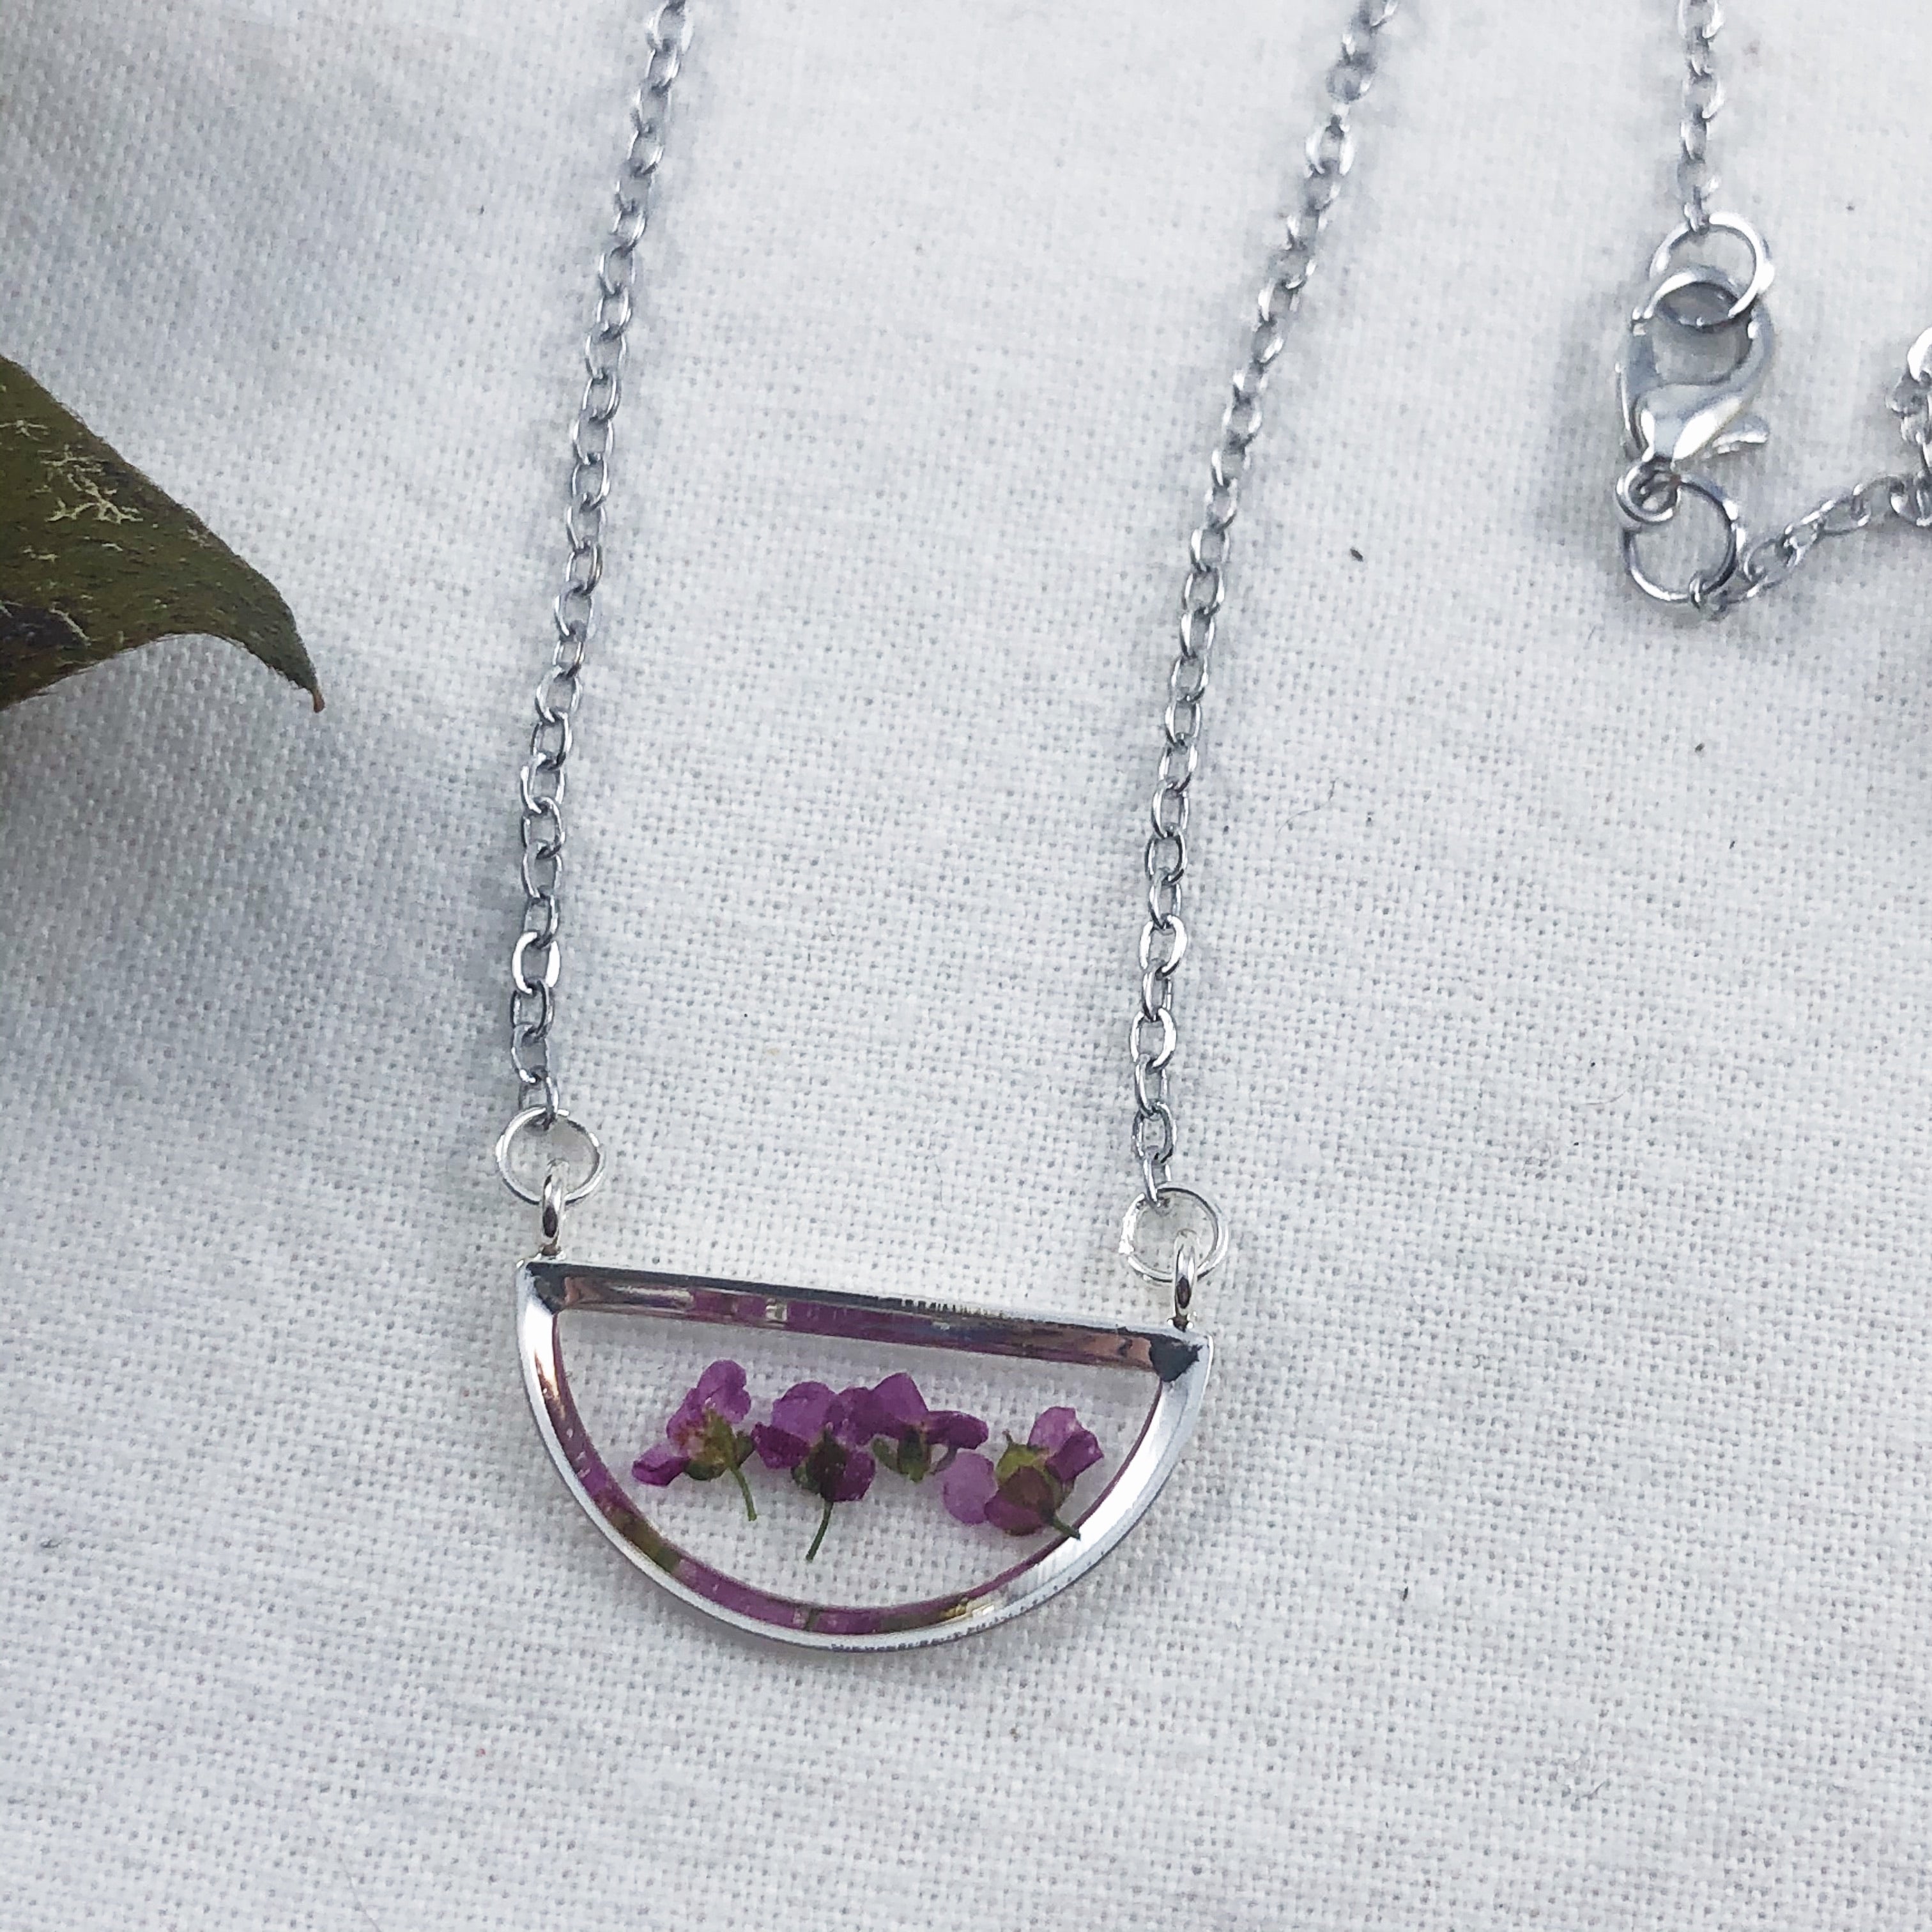 Dancing at Dawn - Silver Semicircle Pressed Flower Necklace